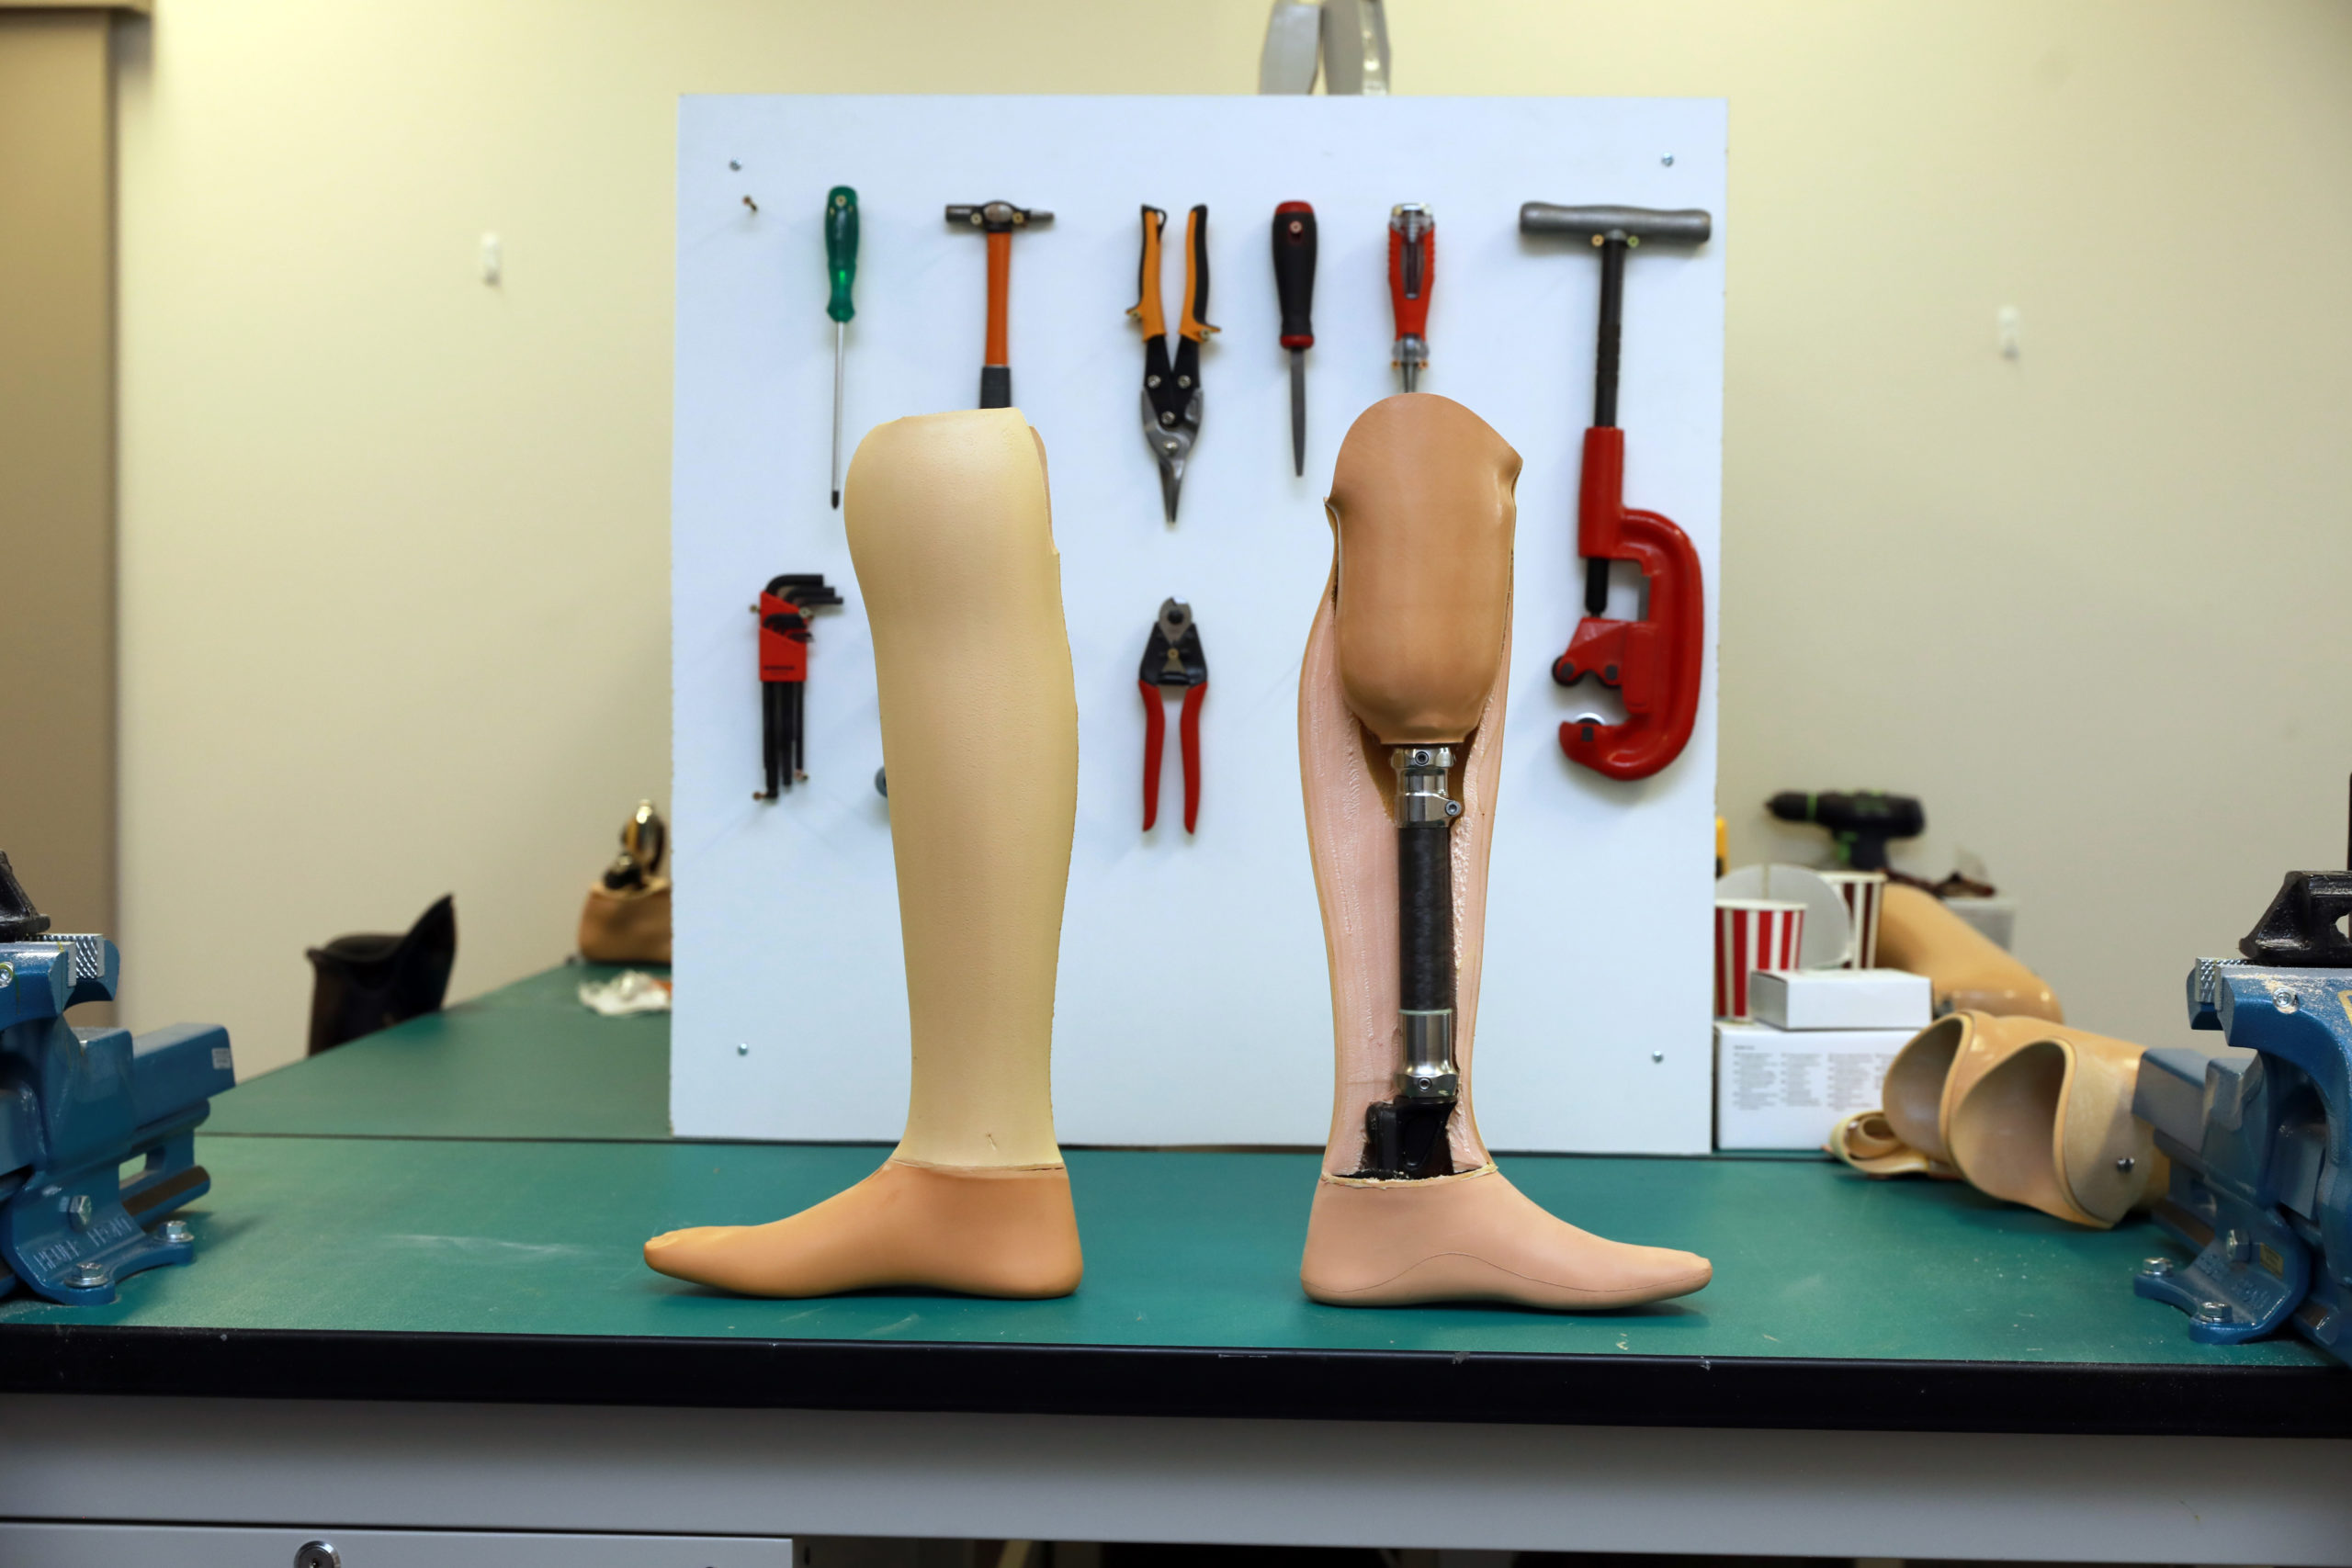 What Materials are Commonly used for Prosthetics?